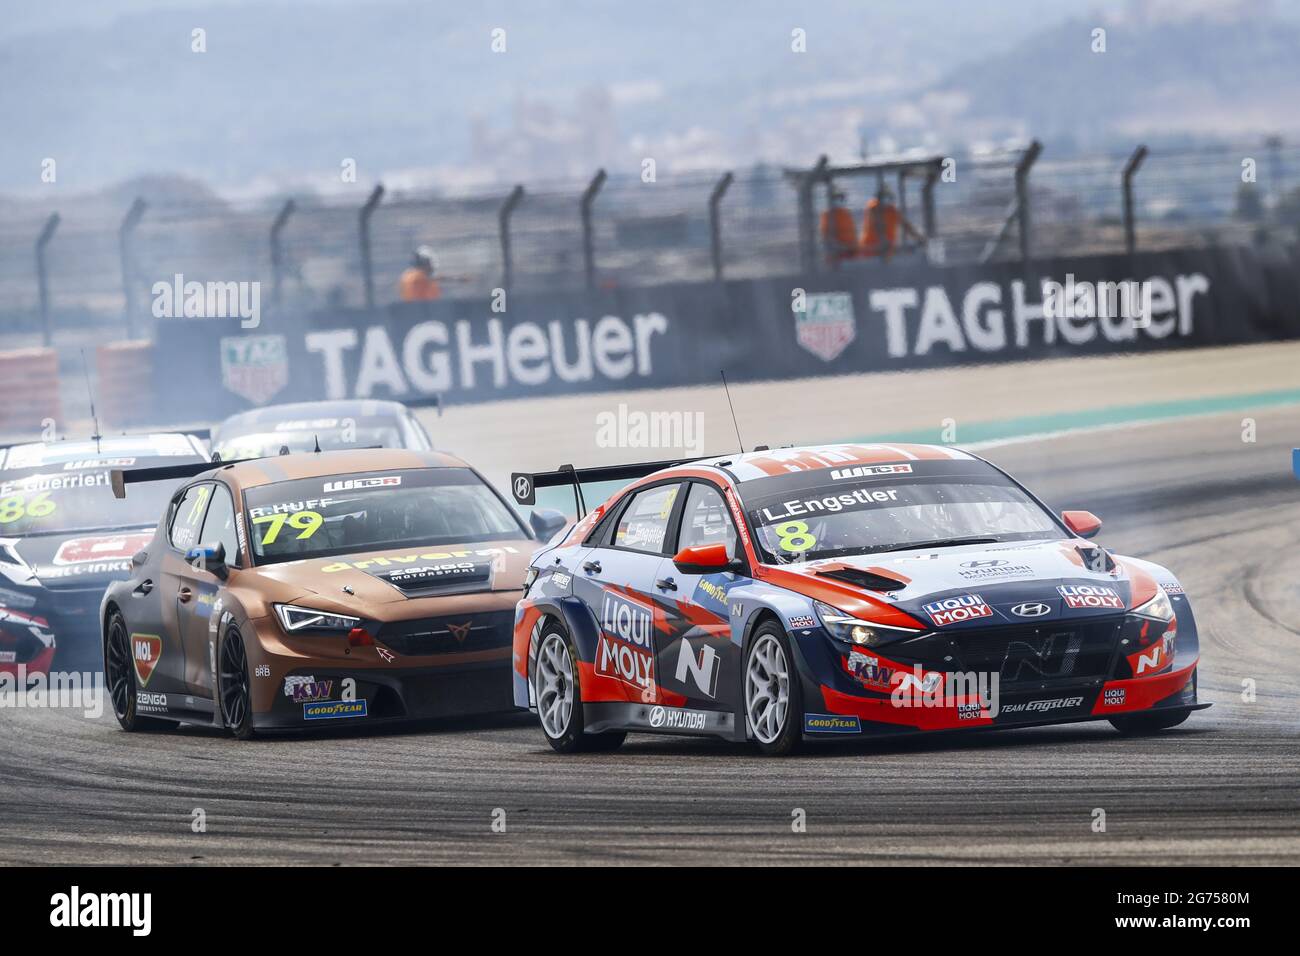 08 Engstler Luca (ger), Engstler Hyundai N Liqui Moly Racing Team, Hyundai Elantra N TCR, action 79 Huff Rob (gbr), Zengo Motorsport, Cupa Leon Competicion TCR, action during the 2021 FIA WTCR Race of Spain, 3rd round of the 2021 FIA World Touring Car Cup, on the Ciudad del Motor de Aragon, from July 10 to 11, 2021 in Alcaniz, Spain - Photo Xavi Bonilla / DPPI Stock Photo